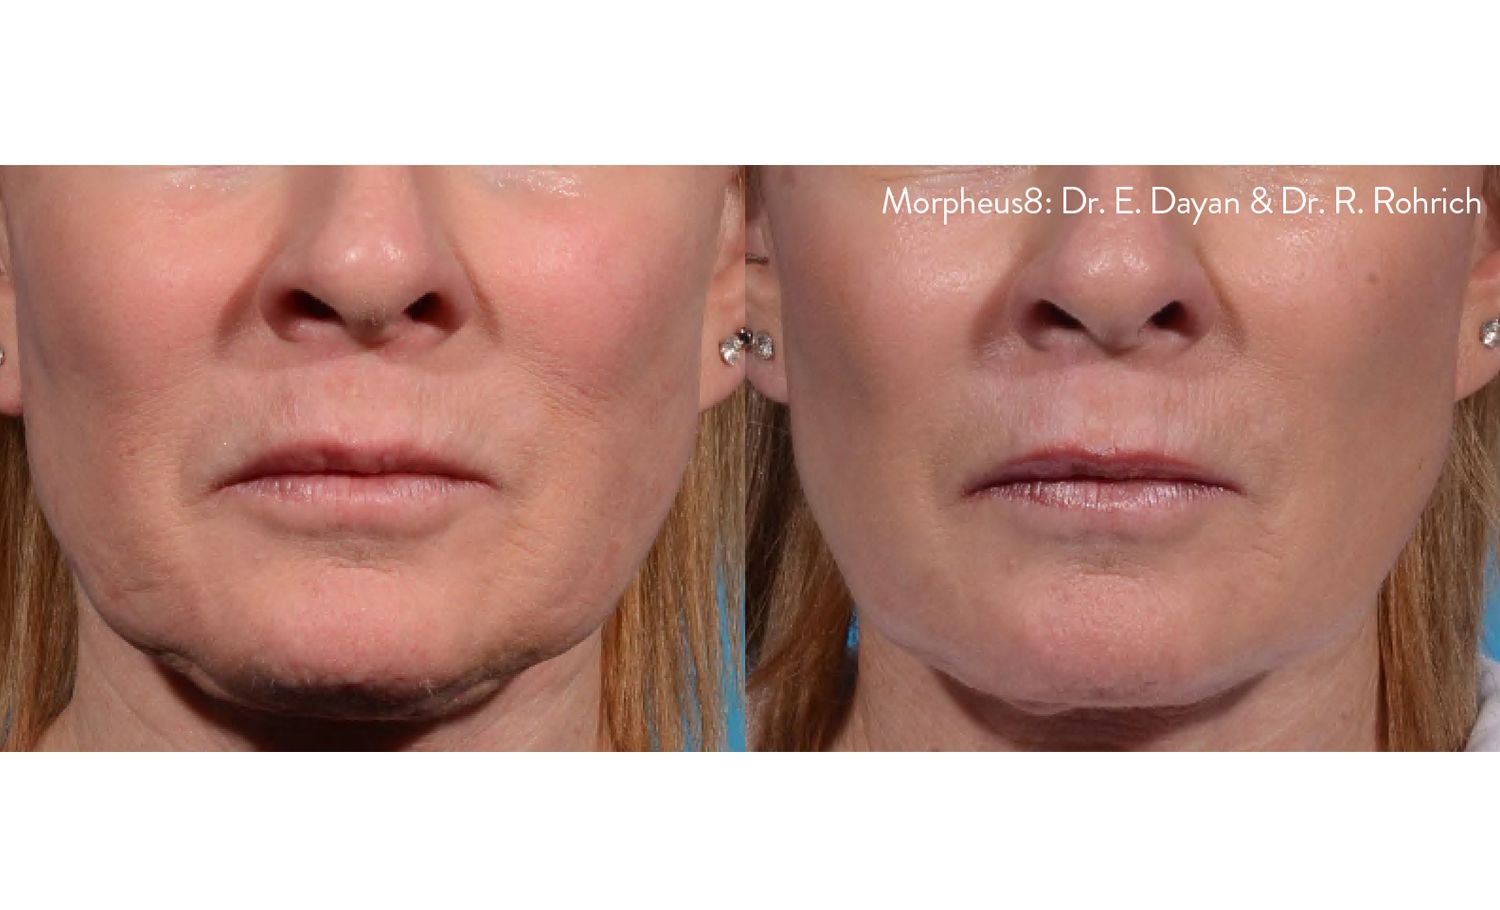 morpheus8-before-after-dr-rohrich and dr. e. dayan-preview-1